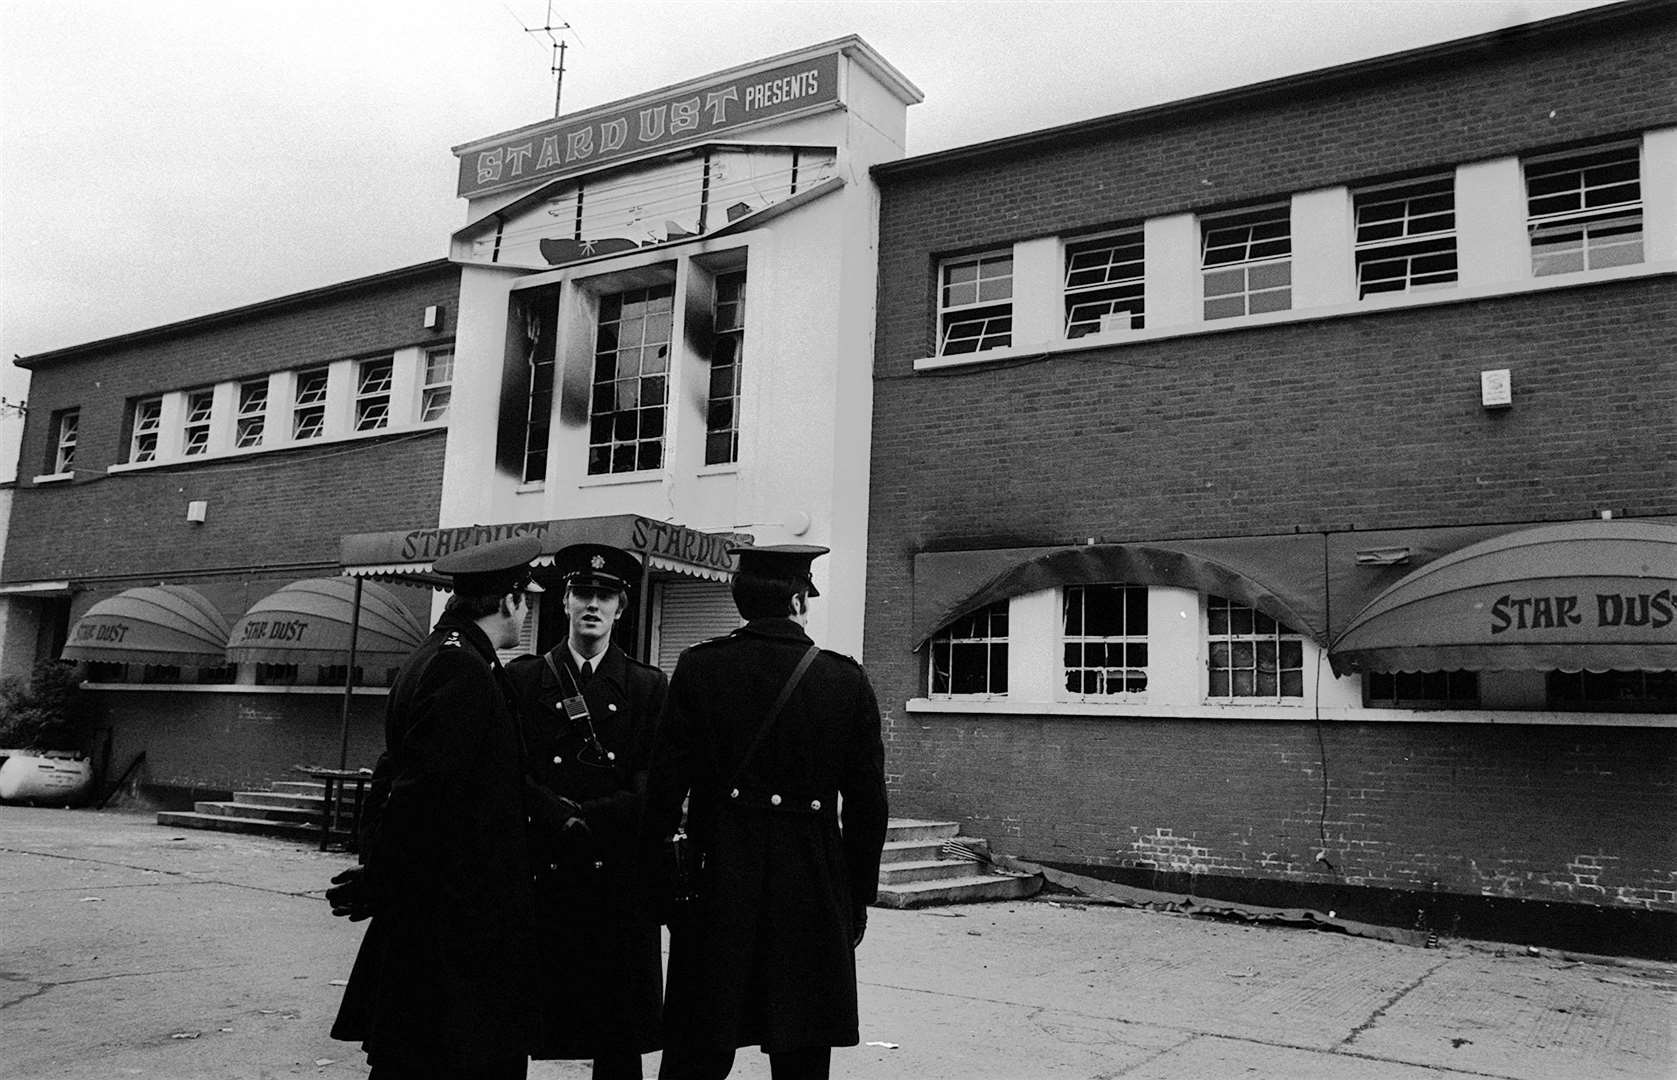 Police stand outside the main entrance of the devastated building in Artane, Dublin, in 1981 (Tony Harris/PA)